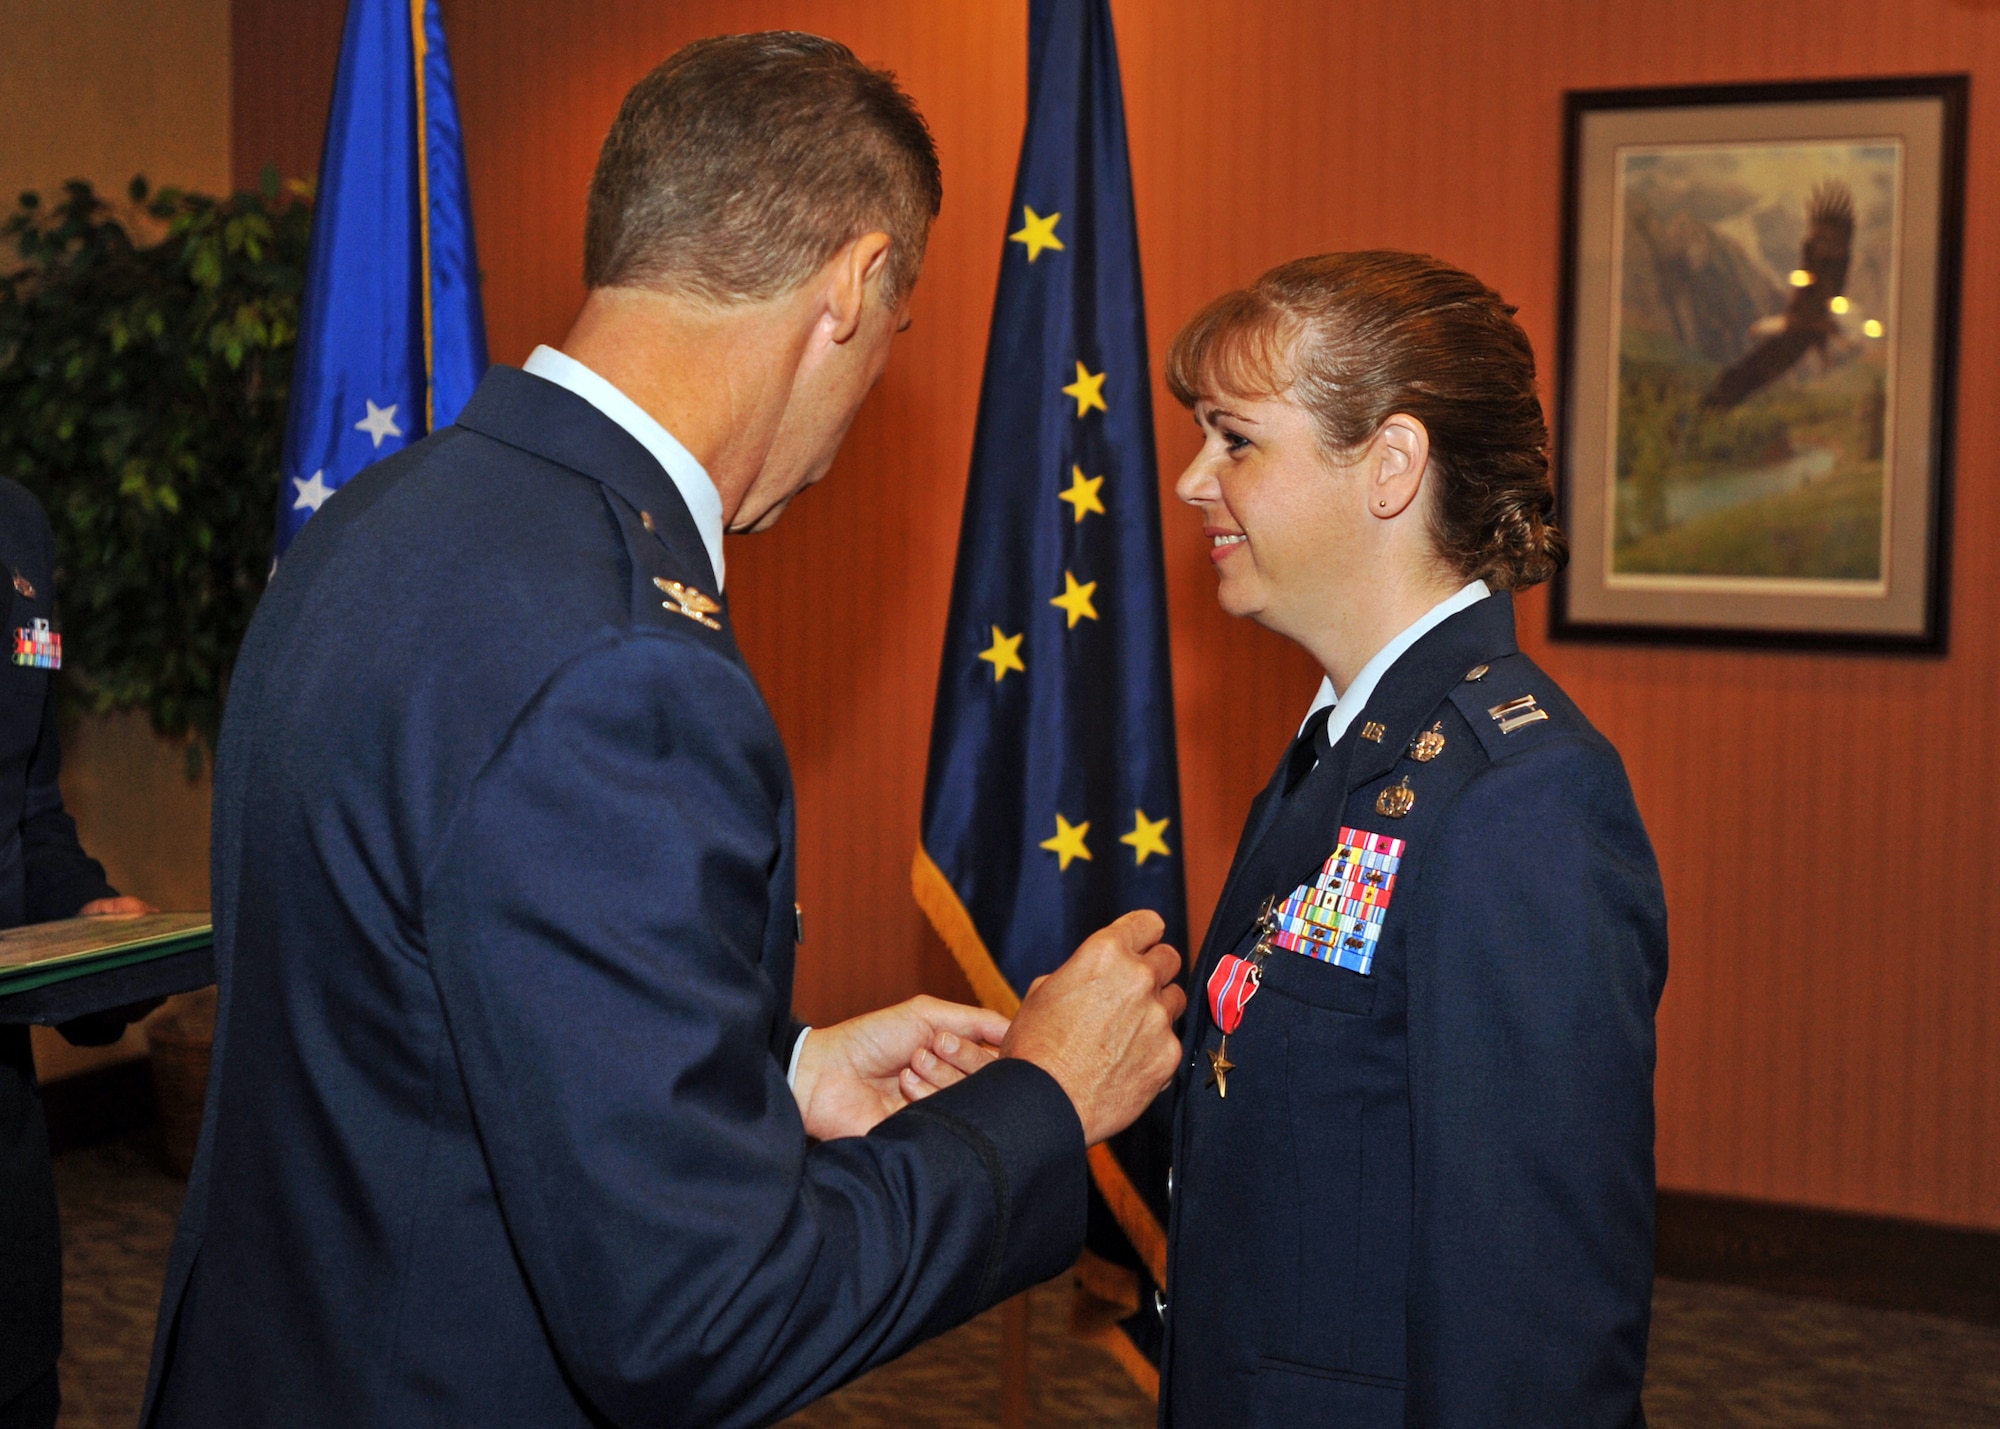 ELMENDORF AIR FORCE BASE, Alaska -- Capt. Karen Rupp is presented with a Bronze Star Medal from Col. Rich McClain during a ceremony here June 22. Rupp was awarded the medal for her service as commander of the 424th Medium Truck Detachment in support of Operation Iraqi Freedom. McClain is the 515th Air Mobility Operations Wing commander at Hickam Air Force Base, Hawaii. (U.S. Air Force photo/Senior Airman Laura Turner)